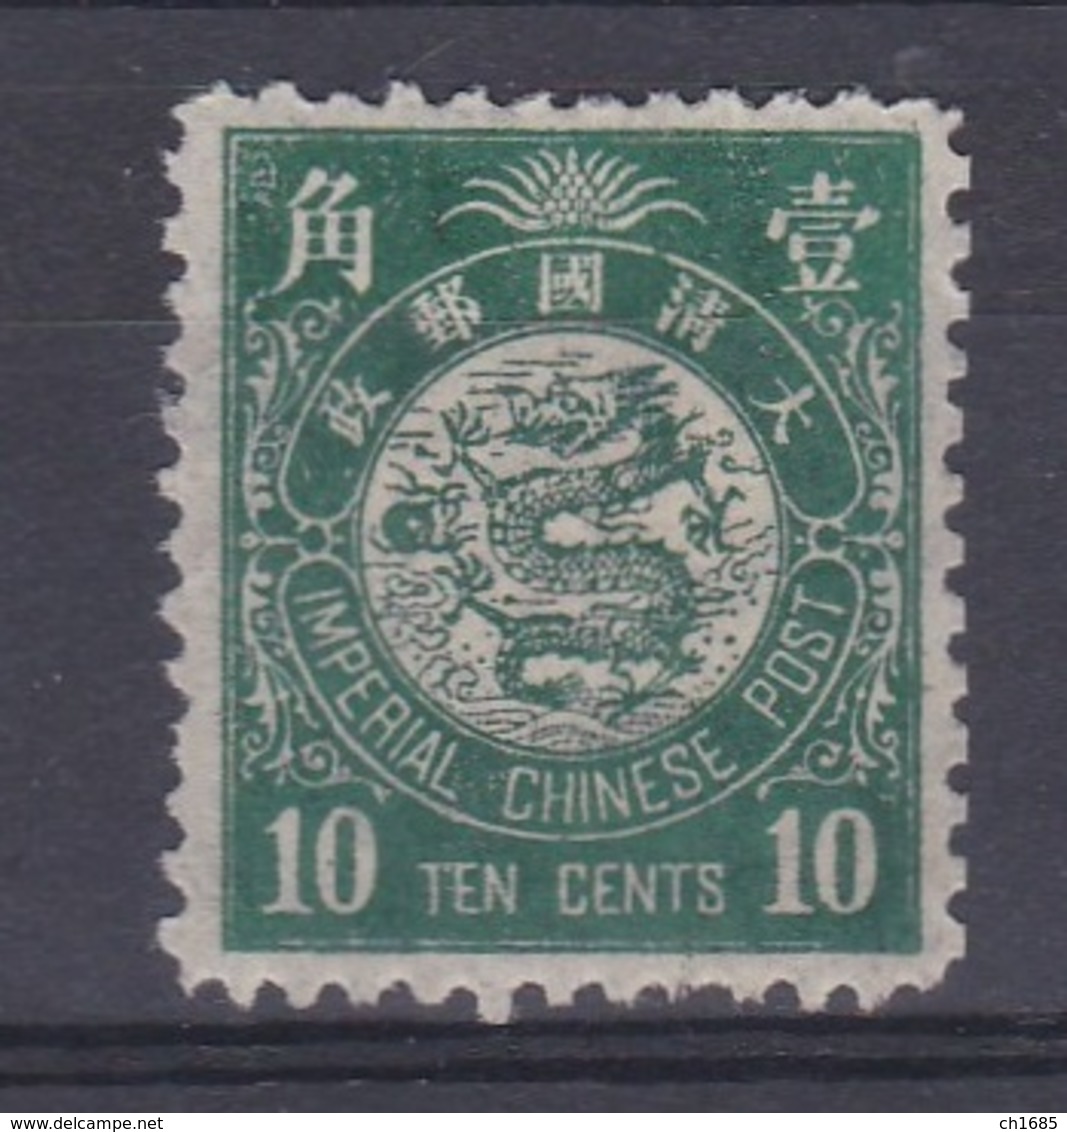 CHINE CHINA :  Dragon Impérial Chinese Post 10 Cents Vert Neuf X - Unused Stamps